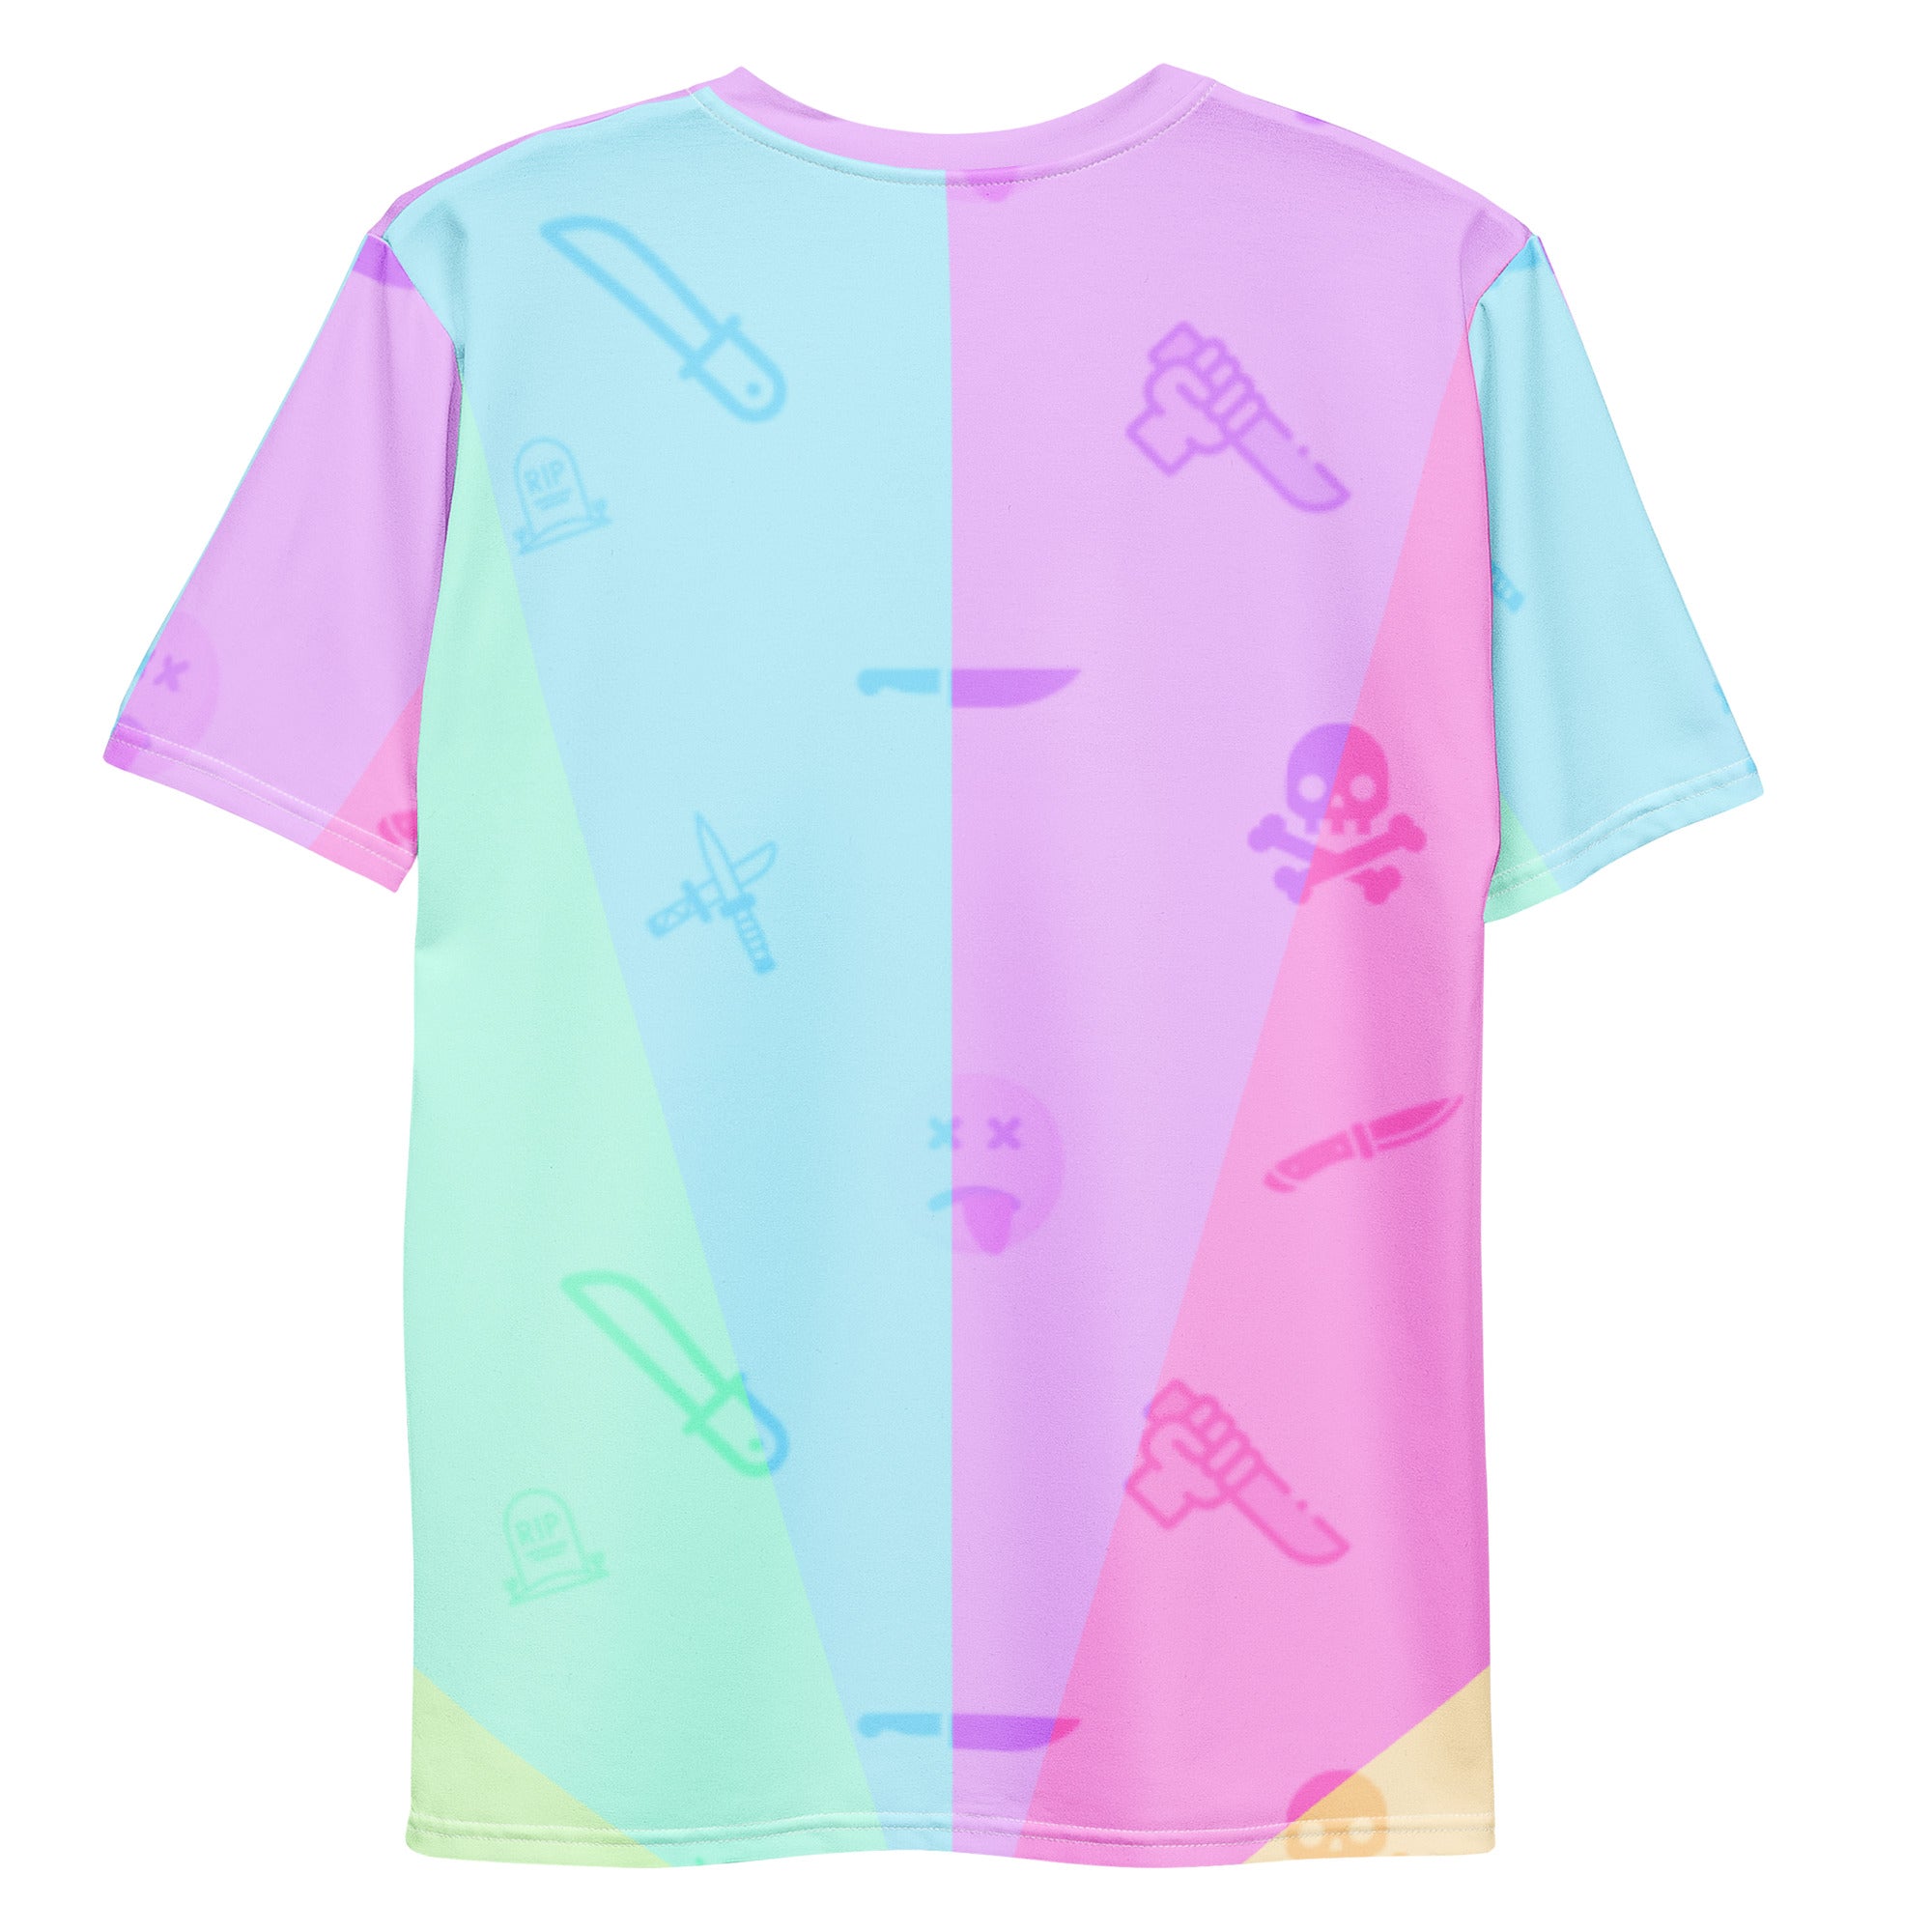 I DIDNT STAB ANYONE TODAY YET - All-Over Print Tee